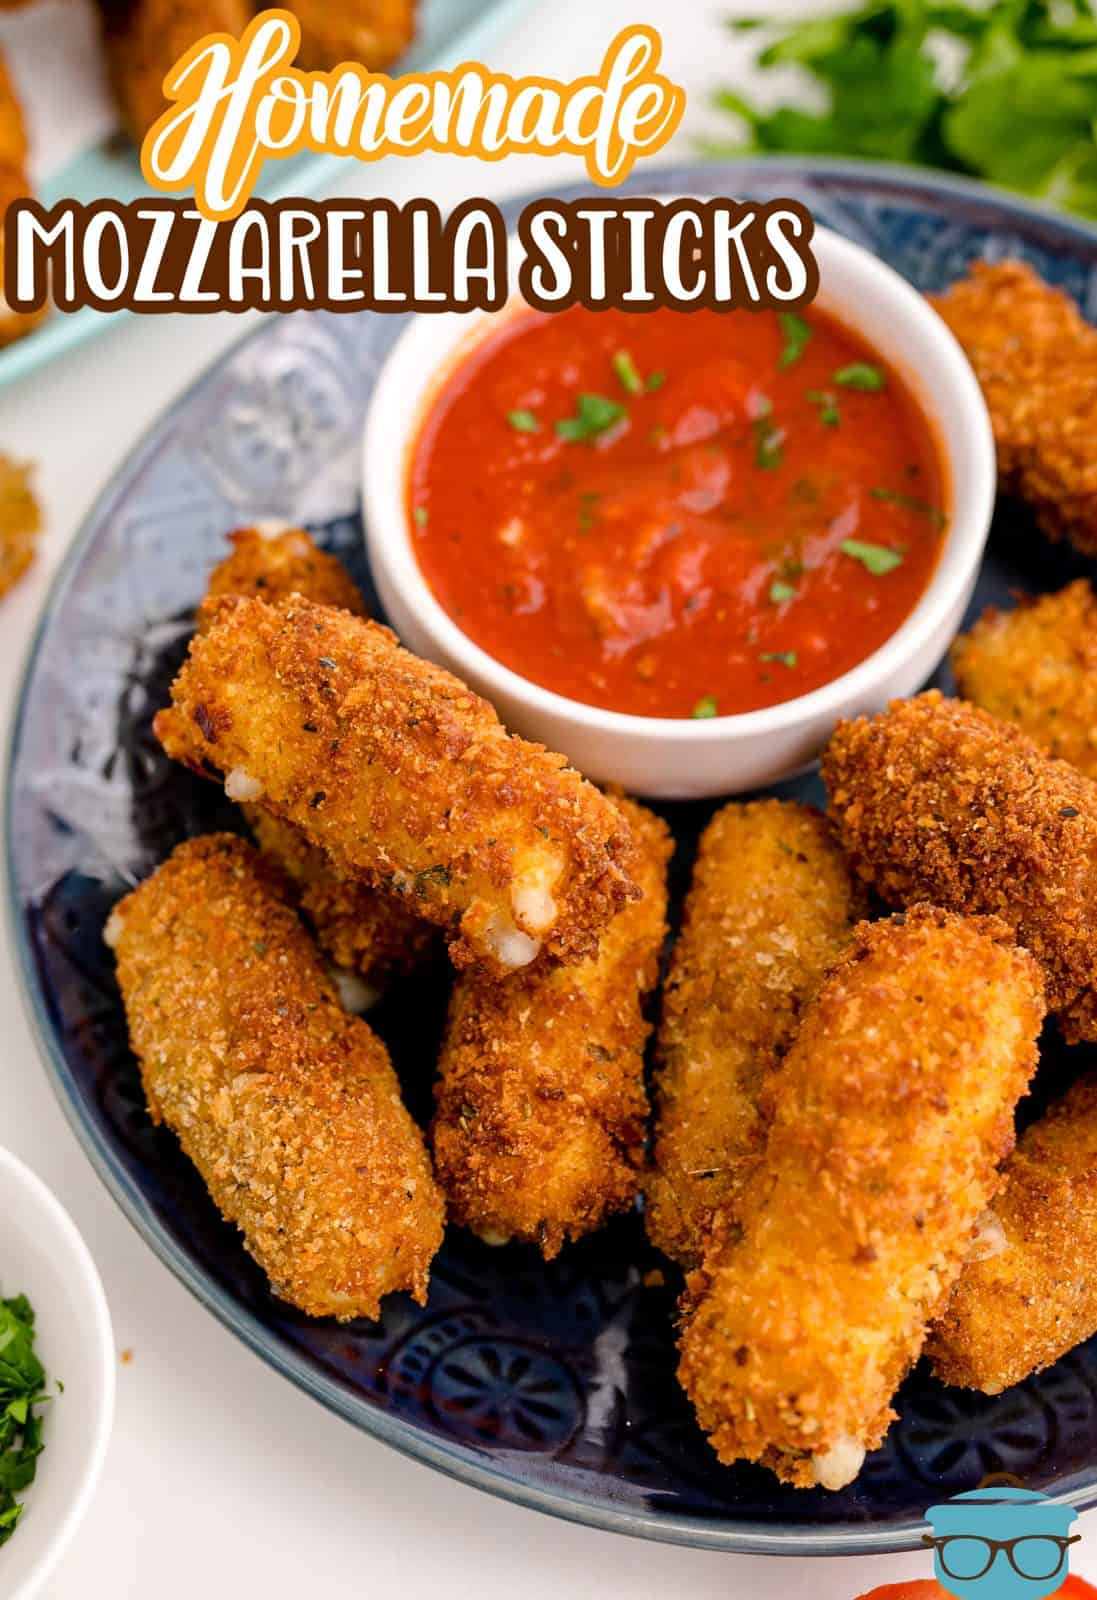 Pinterest image of stacked Homemade Mozzarella Sticks on black plate with sauce.